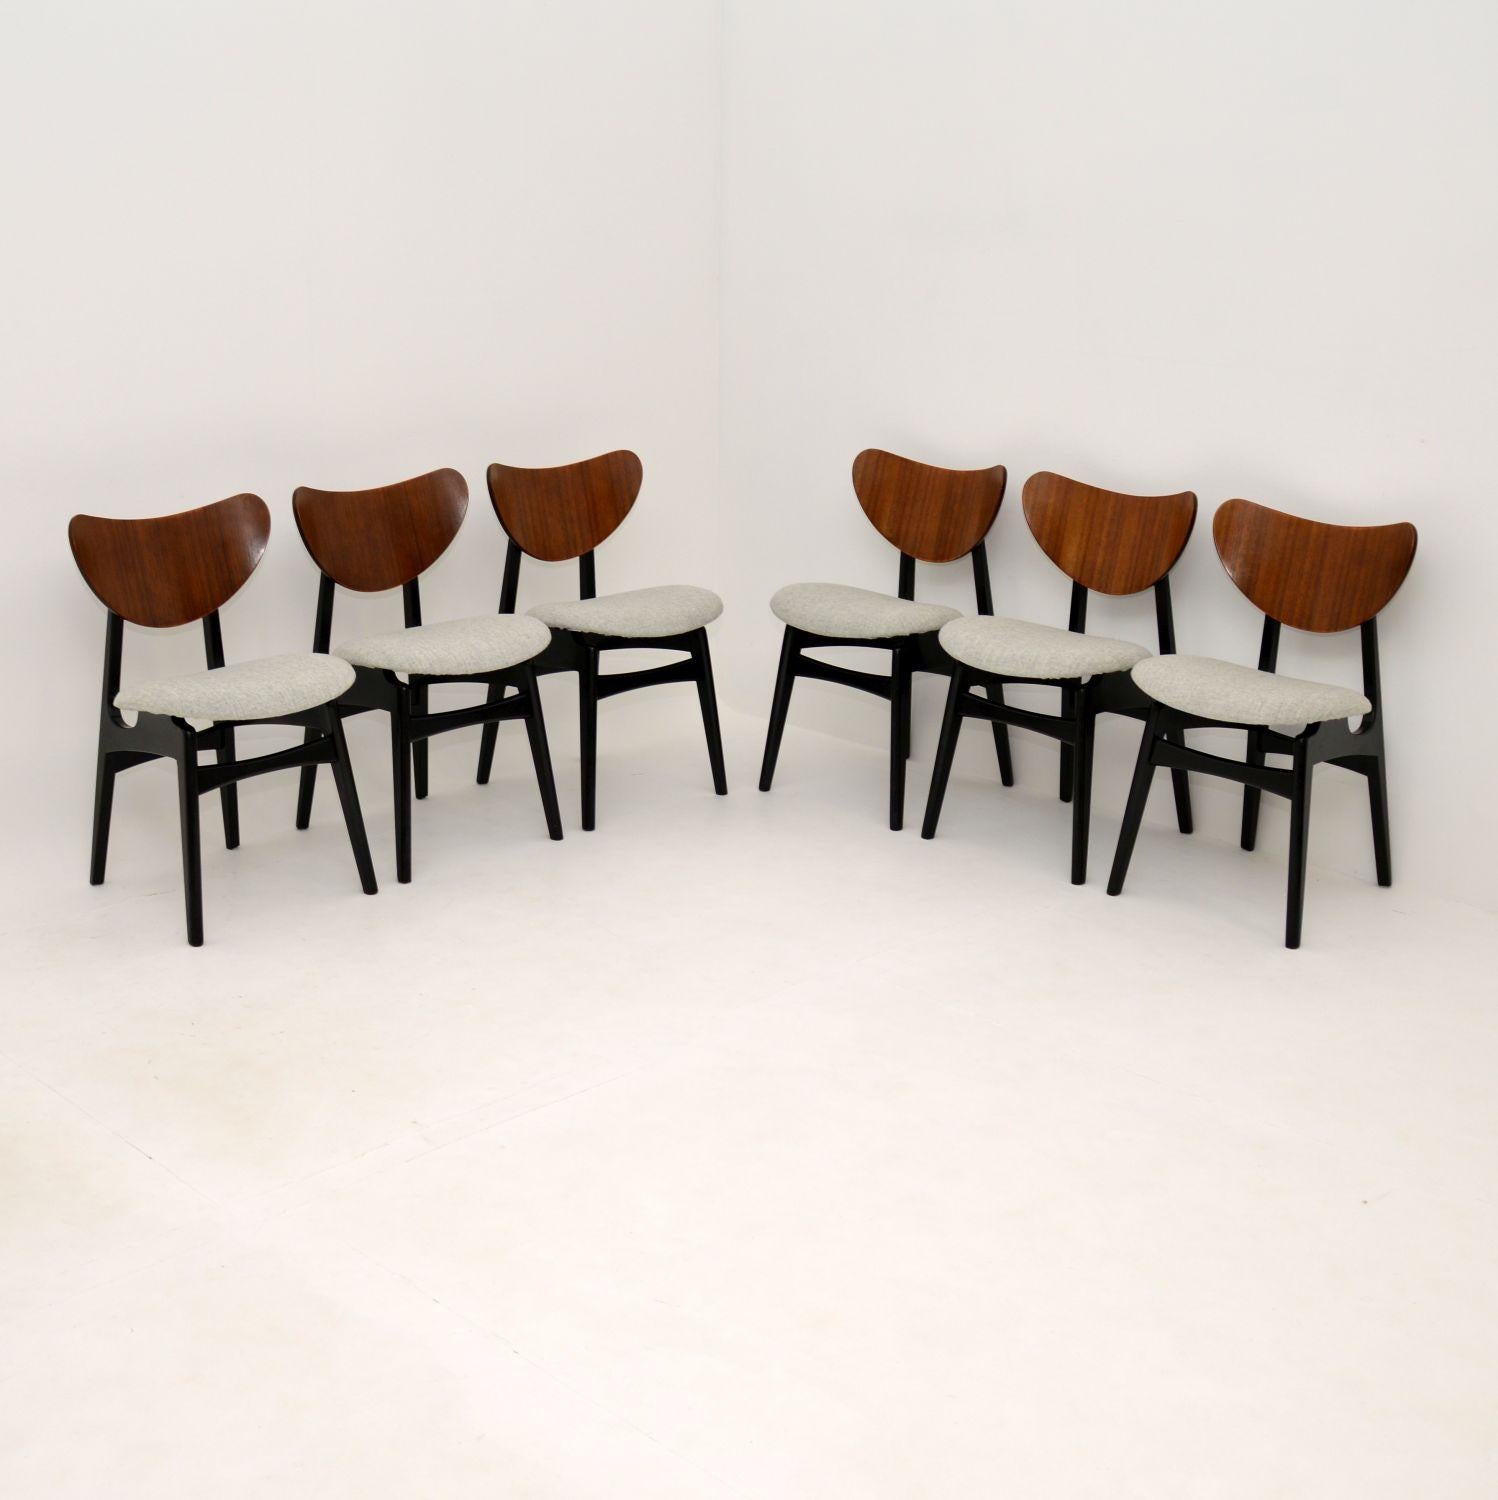 A stunning set of G Plan Librenza dining chairs, otherwise known as butterfly chairs. These were made in England, they date from the 1960’s.

The quality is fantastic, these are very comfortable and incredibly stylish. The tola wood back rests are